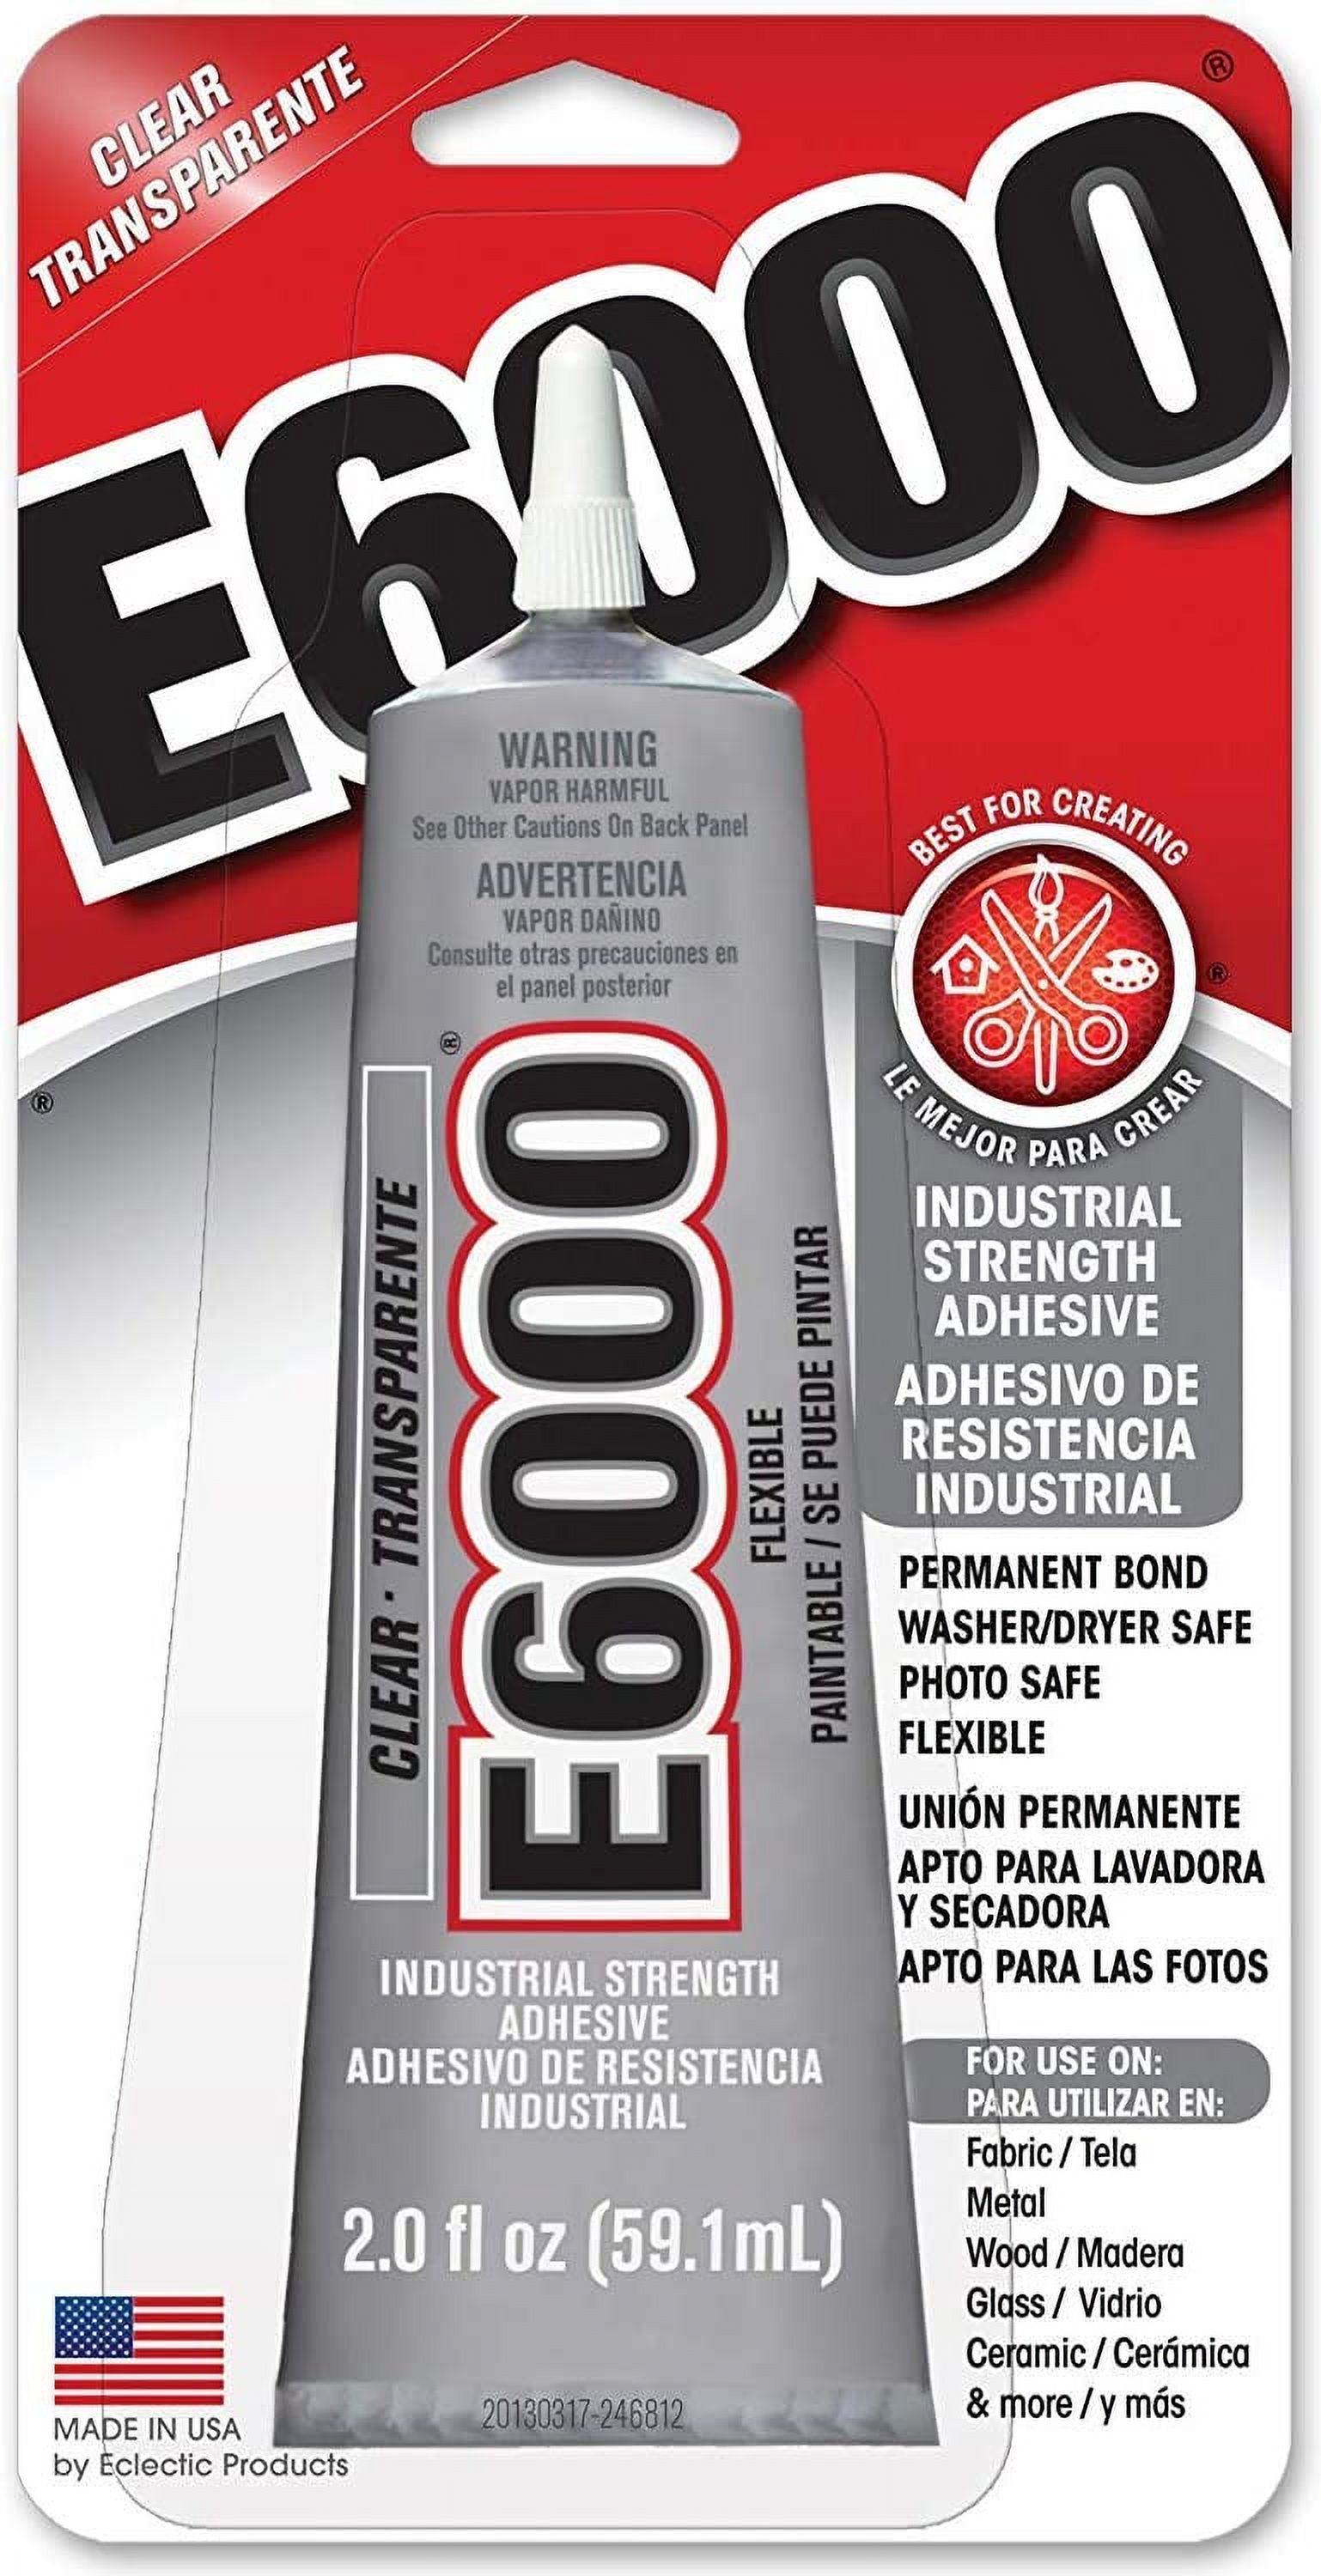 Eclectic E6000 Adhesive Glue, Industrial Strength, Clear, 237032, 2 fl. oz. - image 4 of 6